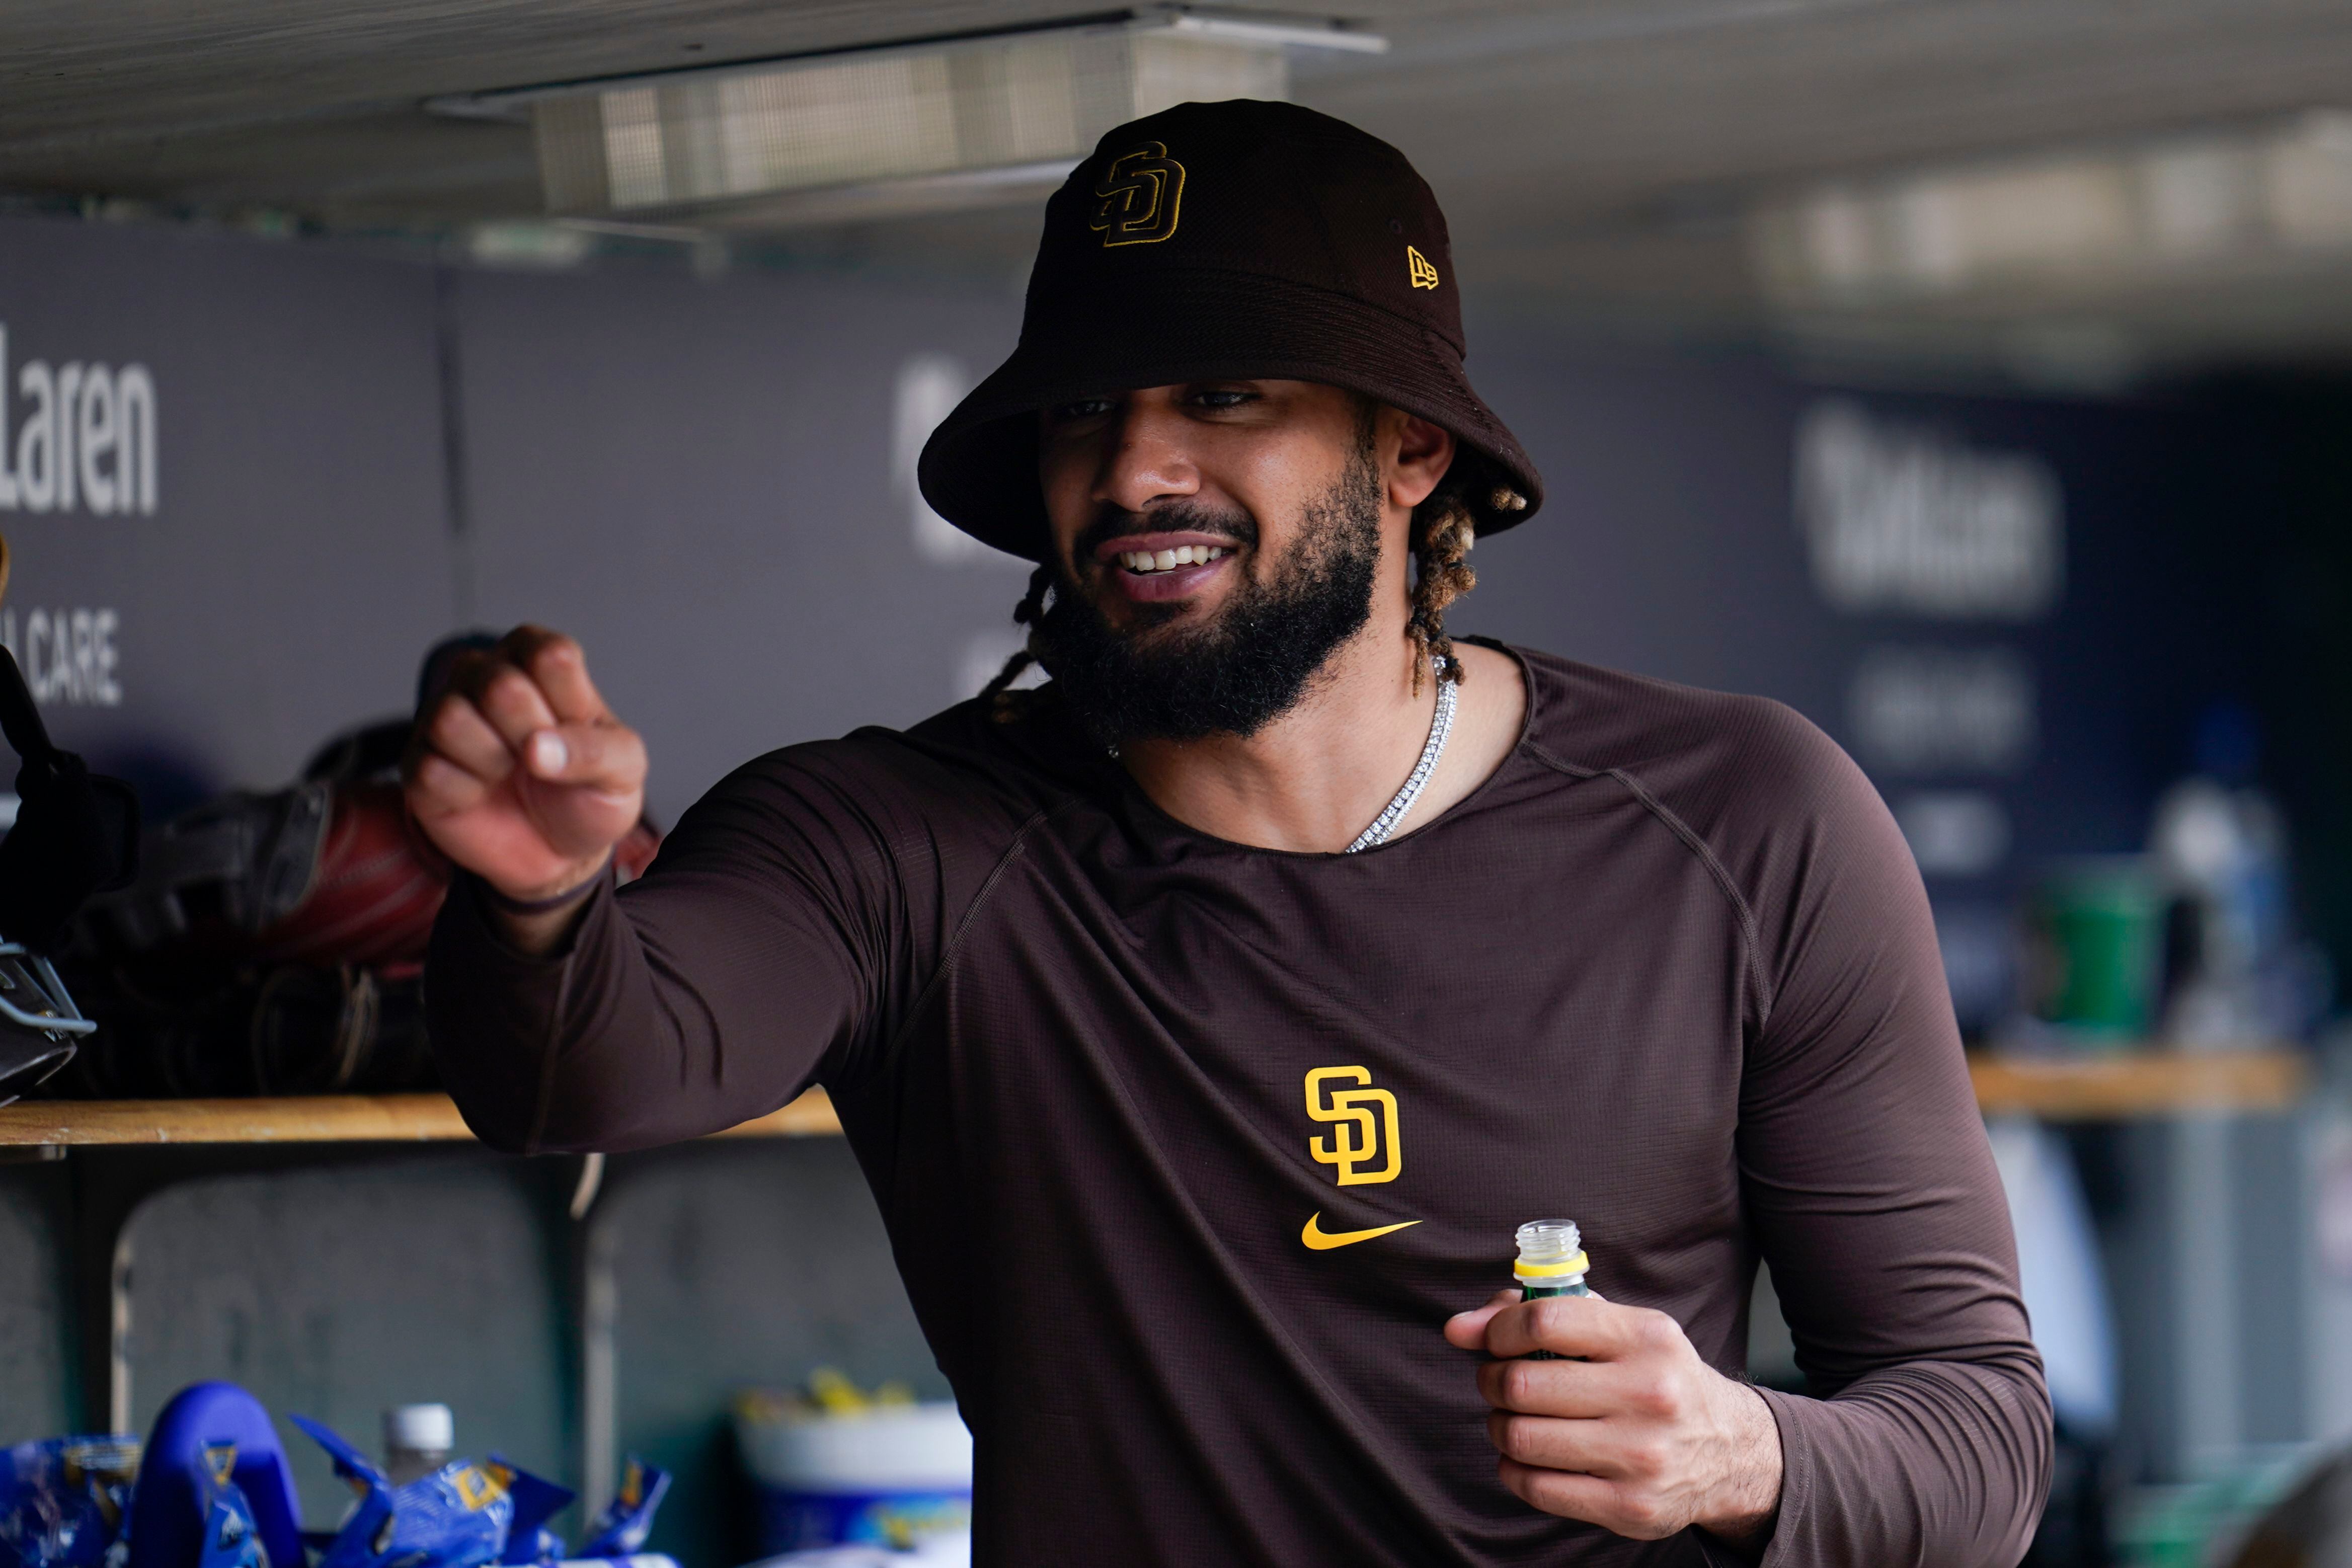 Padres 2020 giveaways include Tatis bobbleheads, themed hats